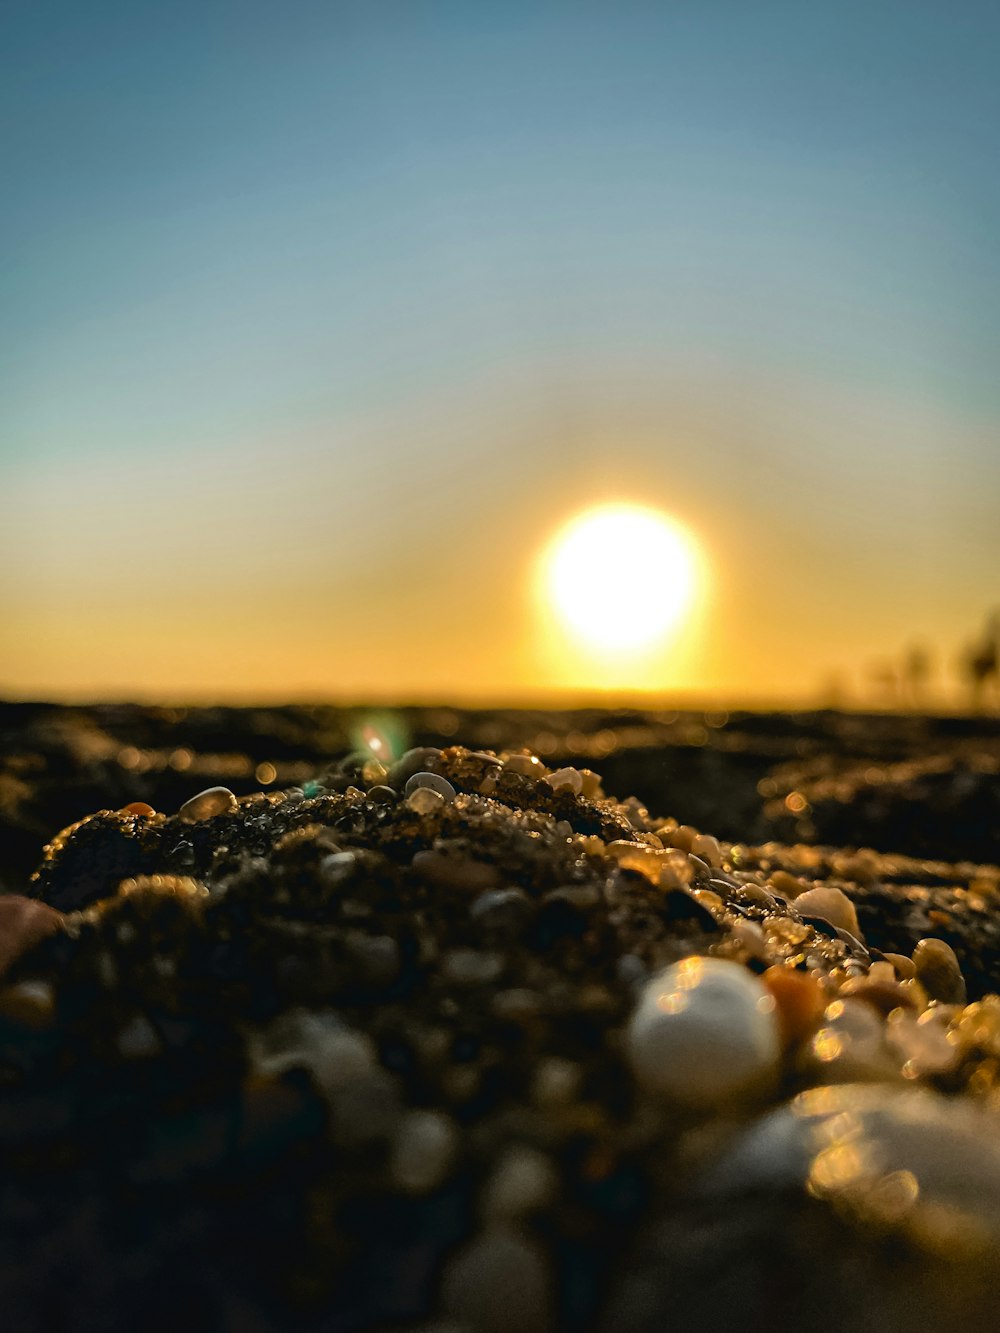 black stones on the ground during sunset